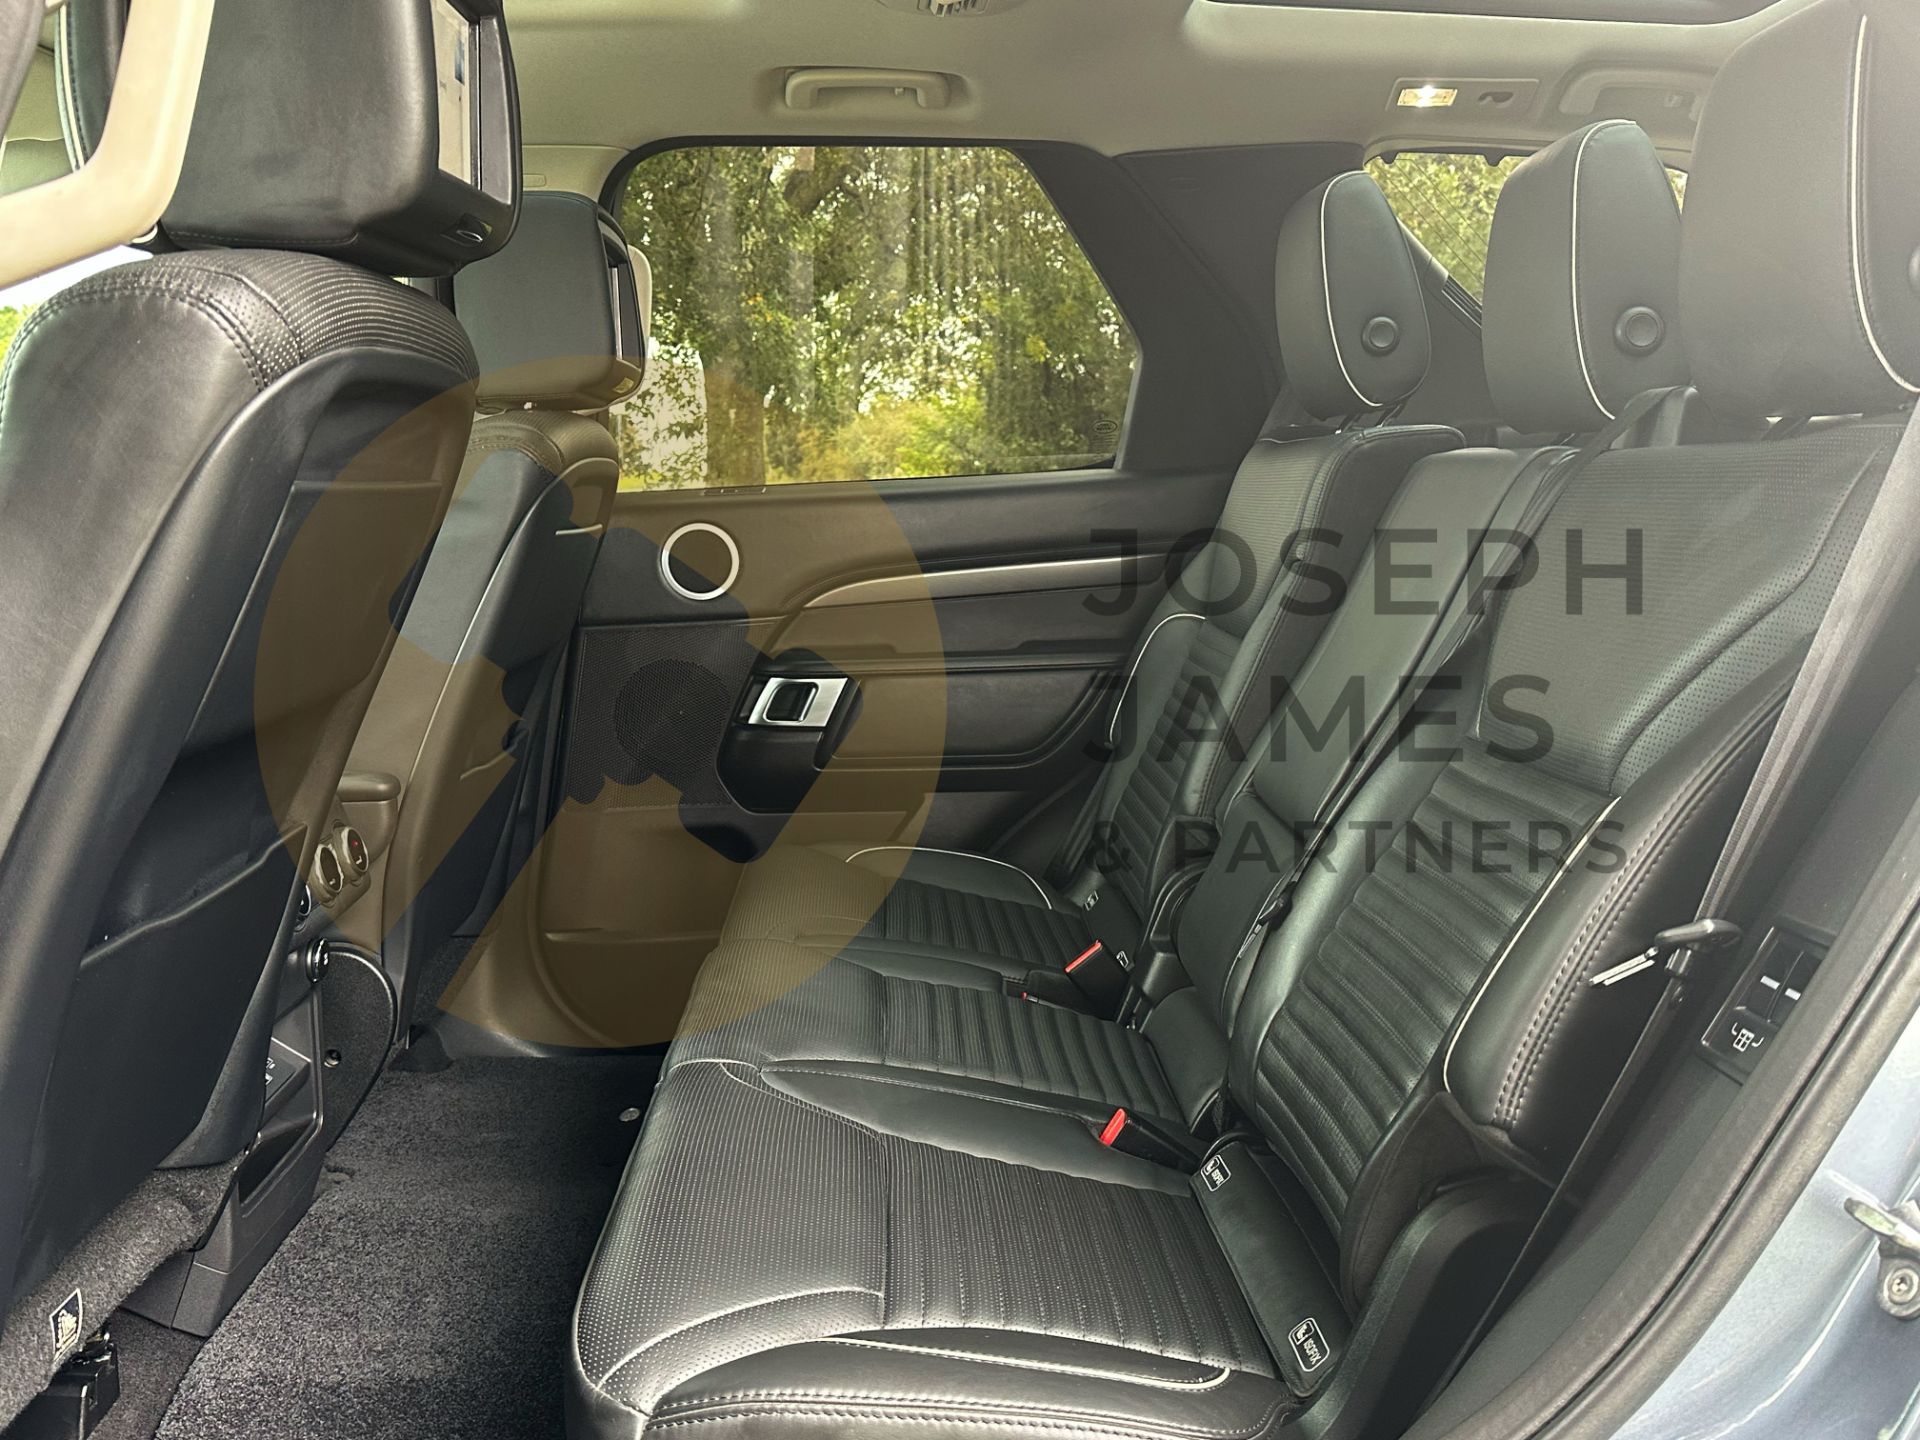 (ON SALE) LAND ROVER DISCOVERY 5 *HSE LUXURY* 7 SEATER SUV (2018 - FACELIFT MODEL) (LOW MILEAGE) - Image 28 of 66